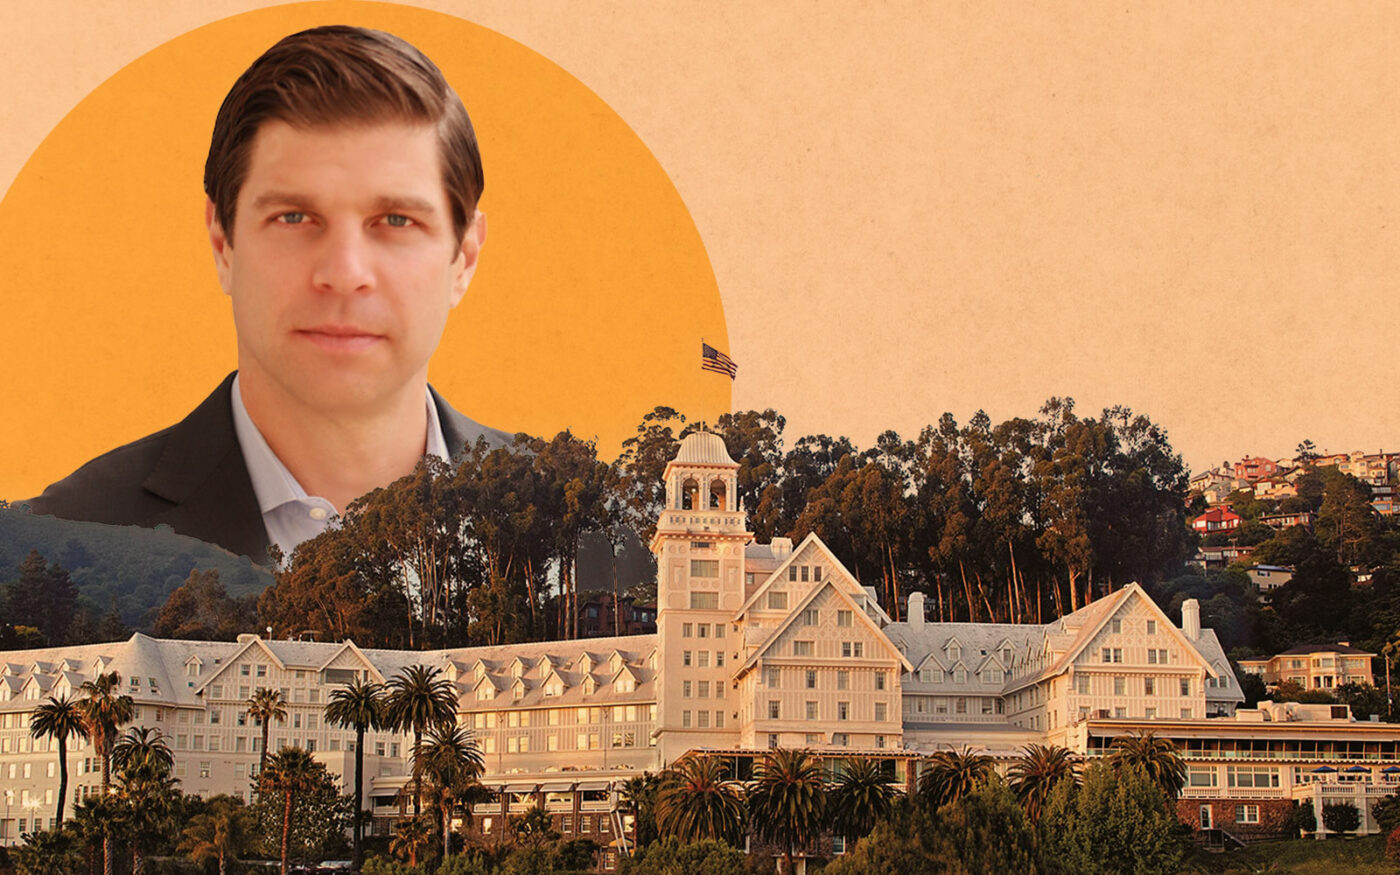 Ohana Real Estate's Christopher Smith; Claremont Hotel, 41 Tunnel Road, Berkeley (Getty, Fairmont Hotels, Ohana Real Estate)